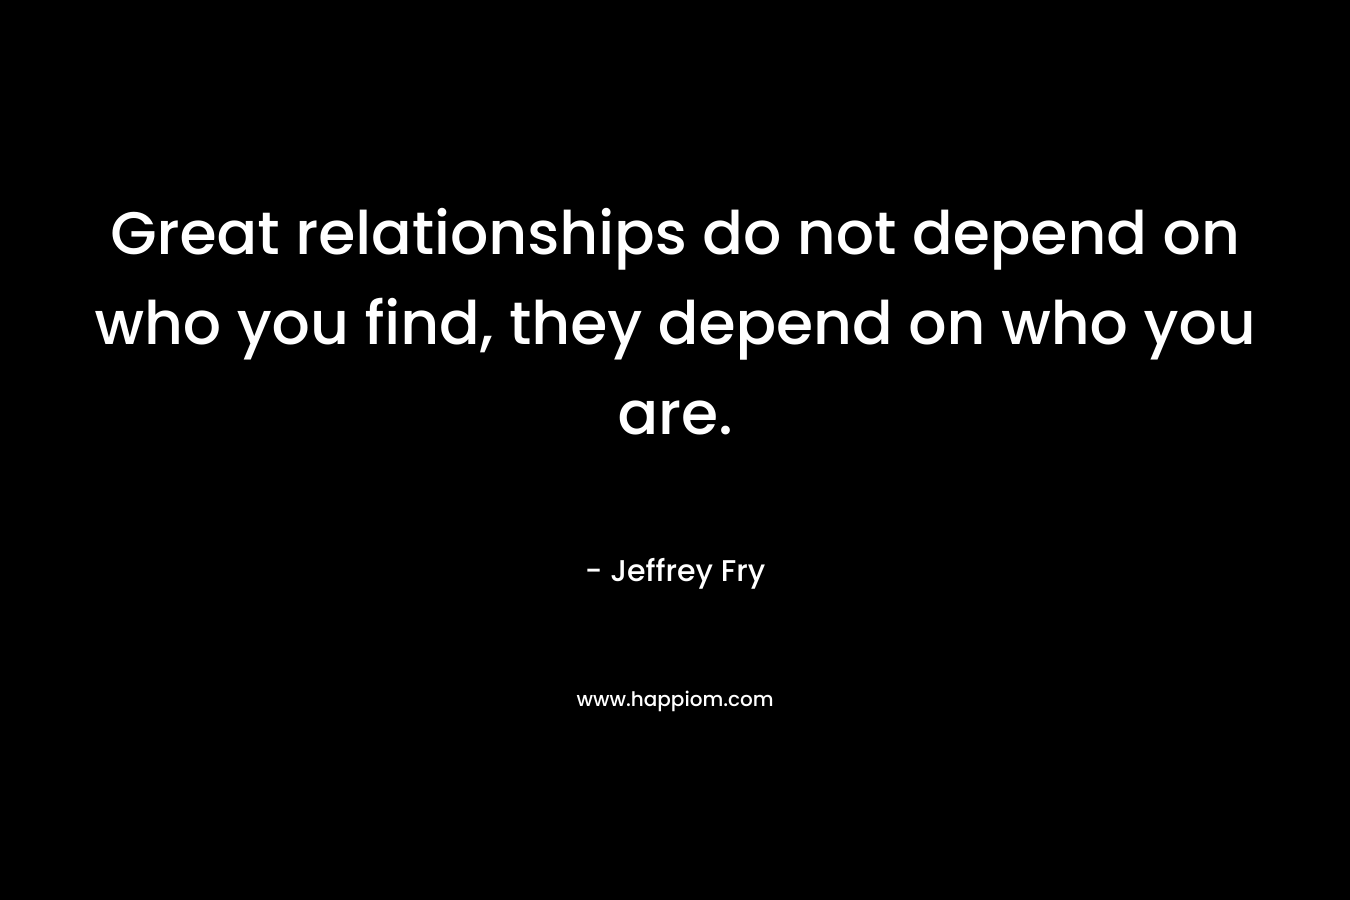 Great relationships do not depend on who you find, they depend on who you are.